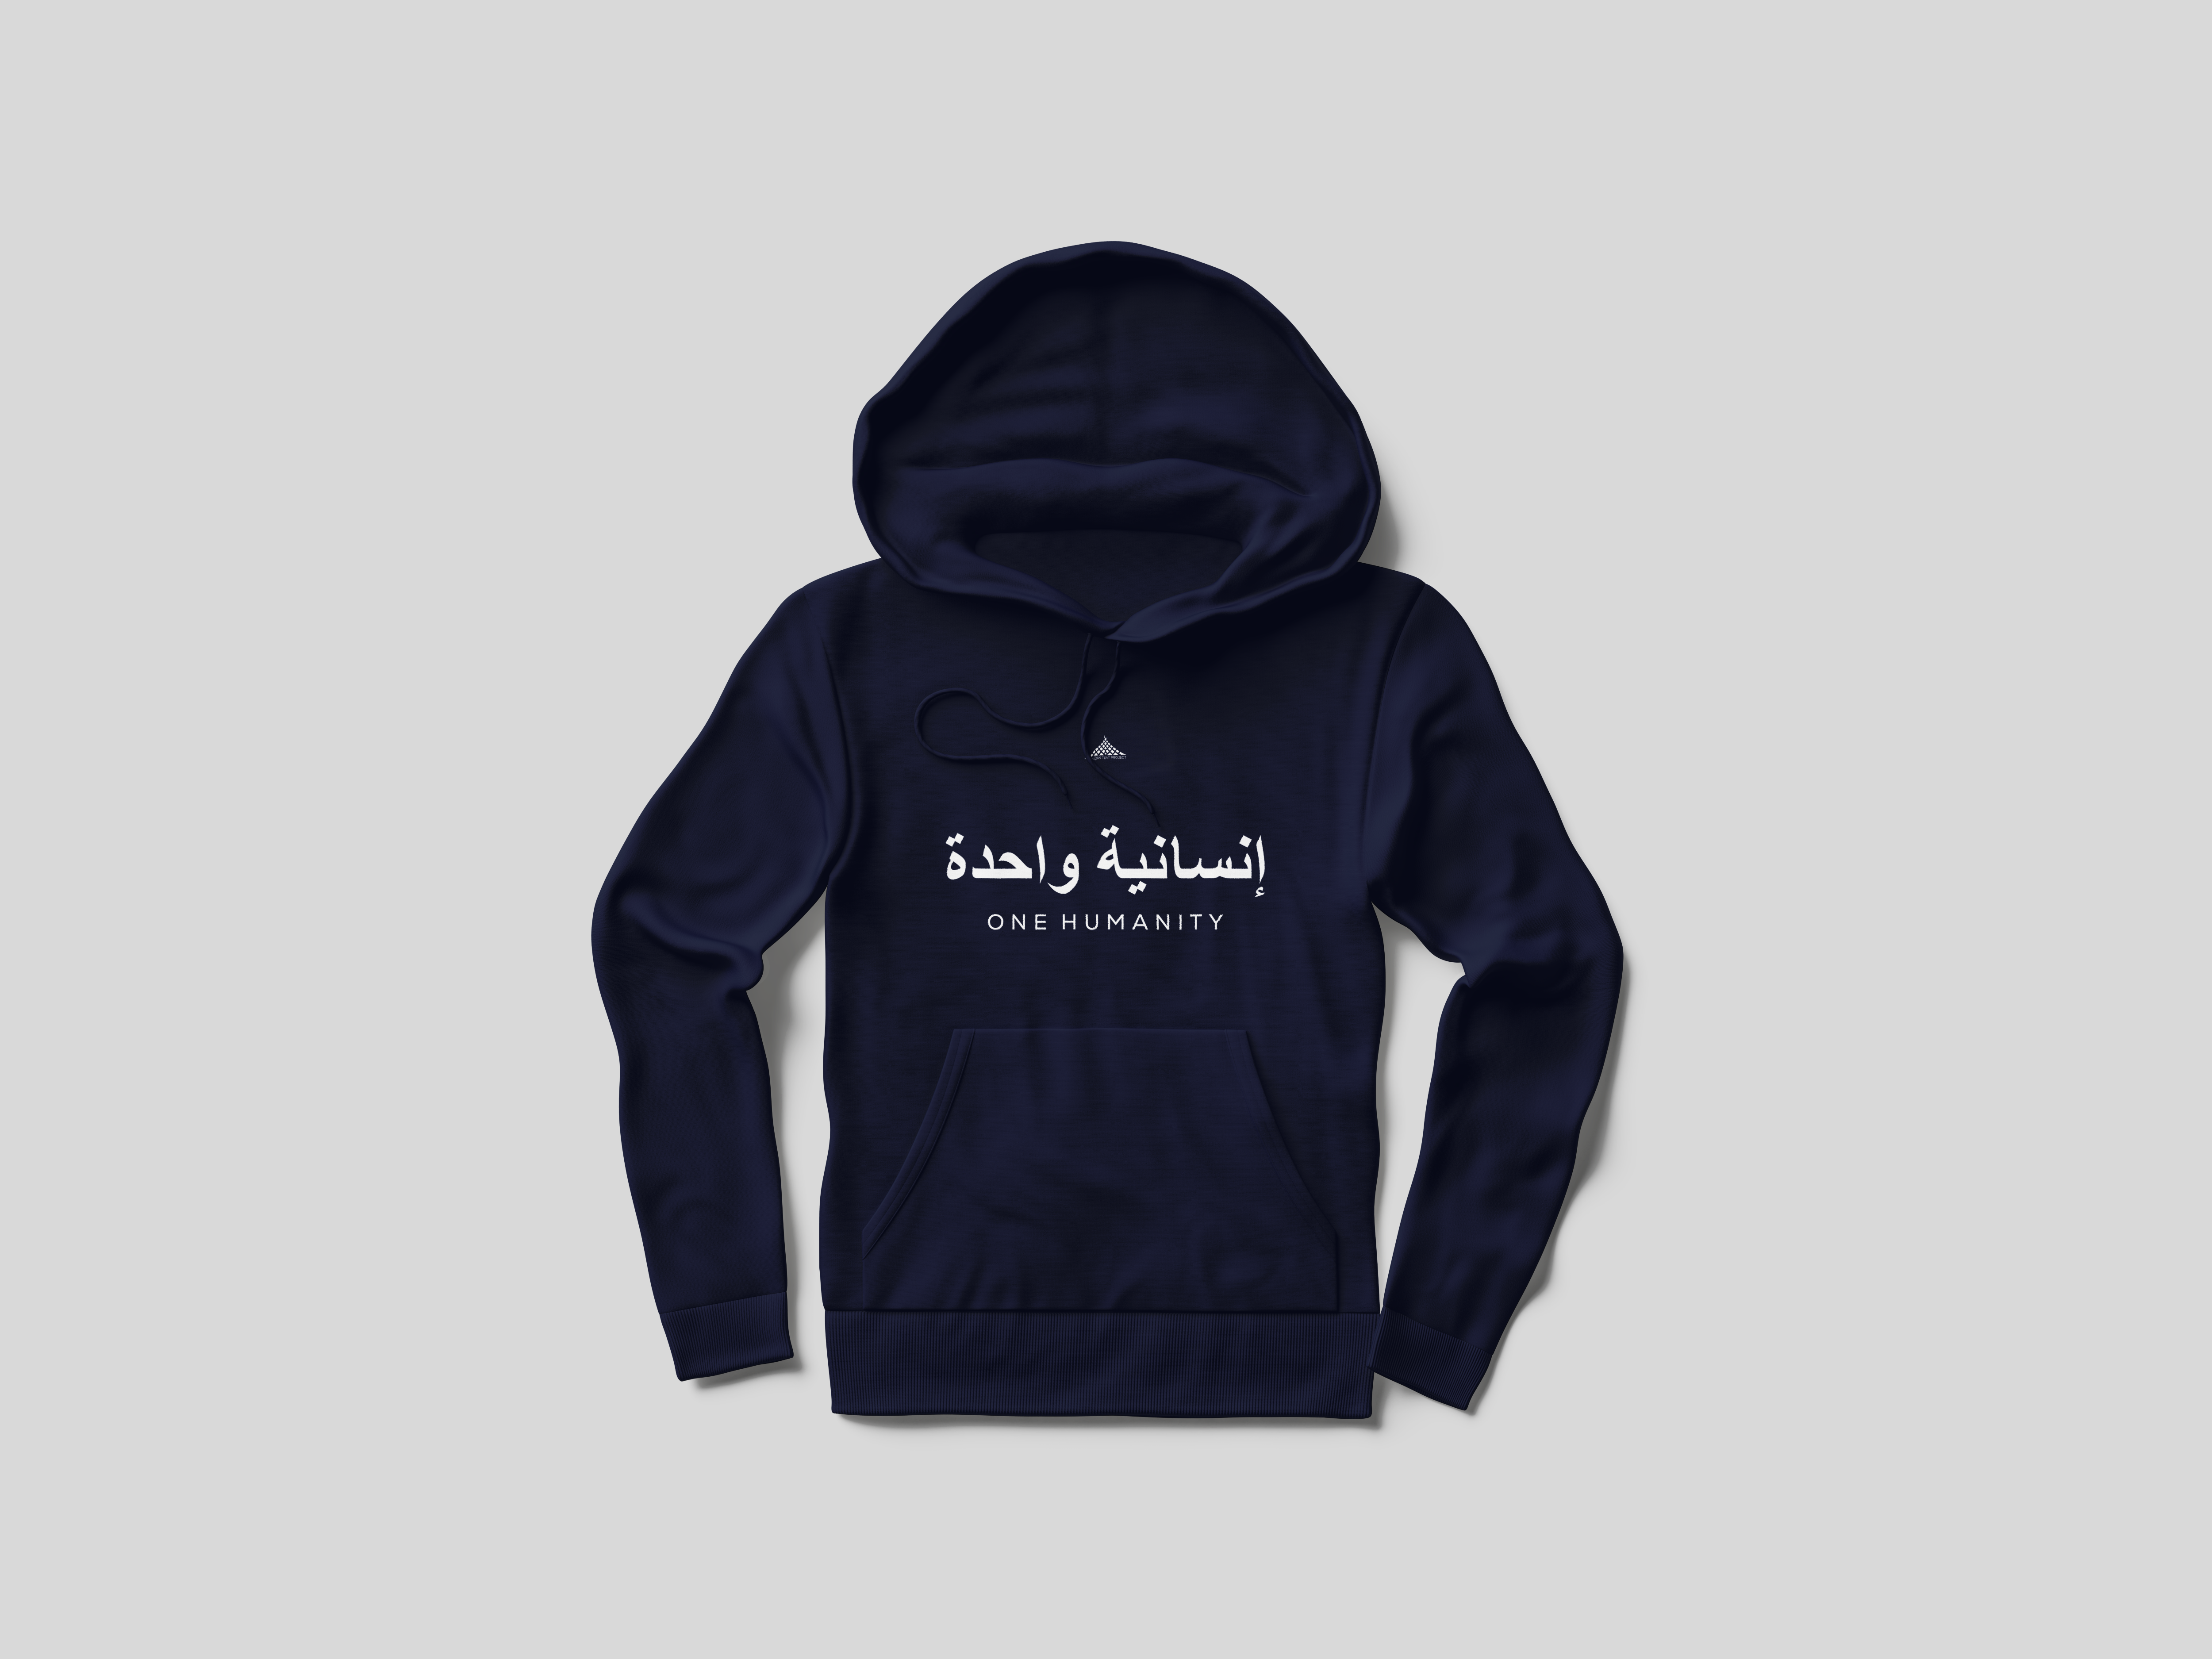 Hoodie Navy with one humanity written on it.